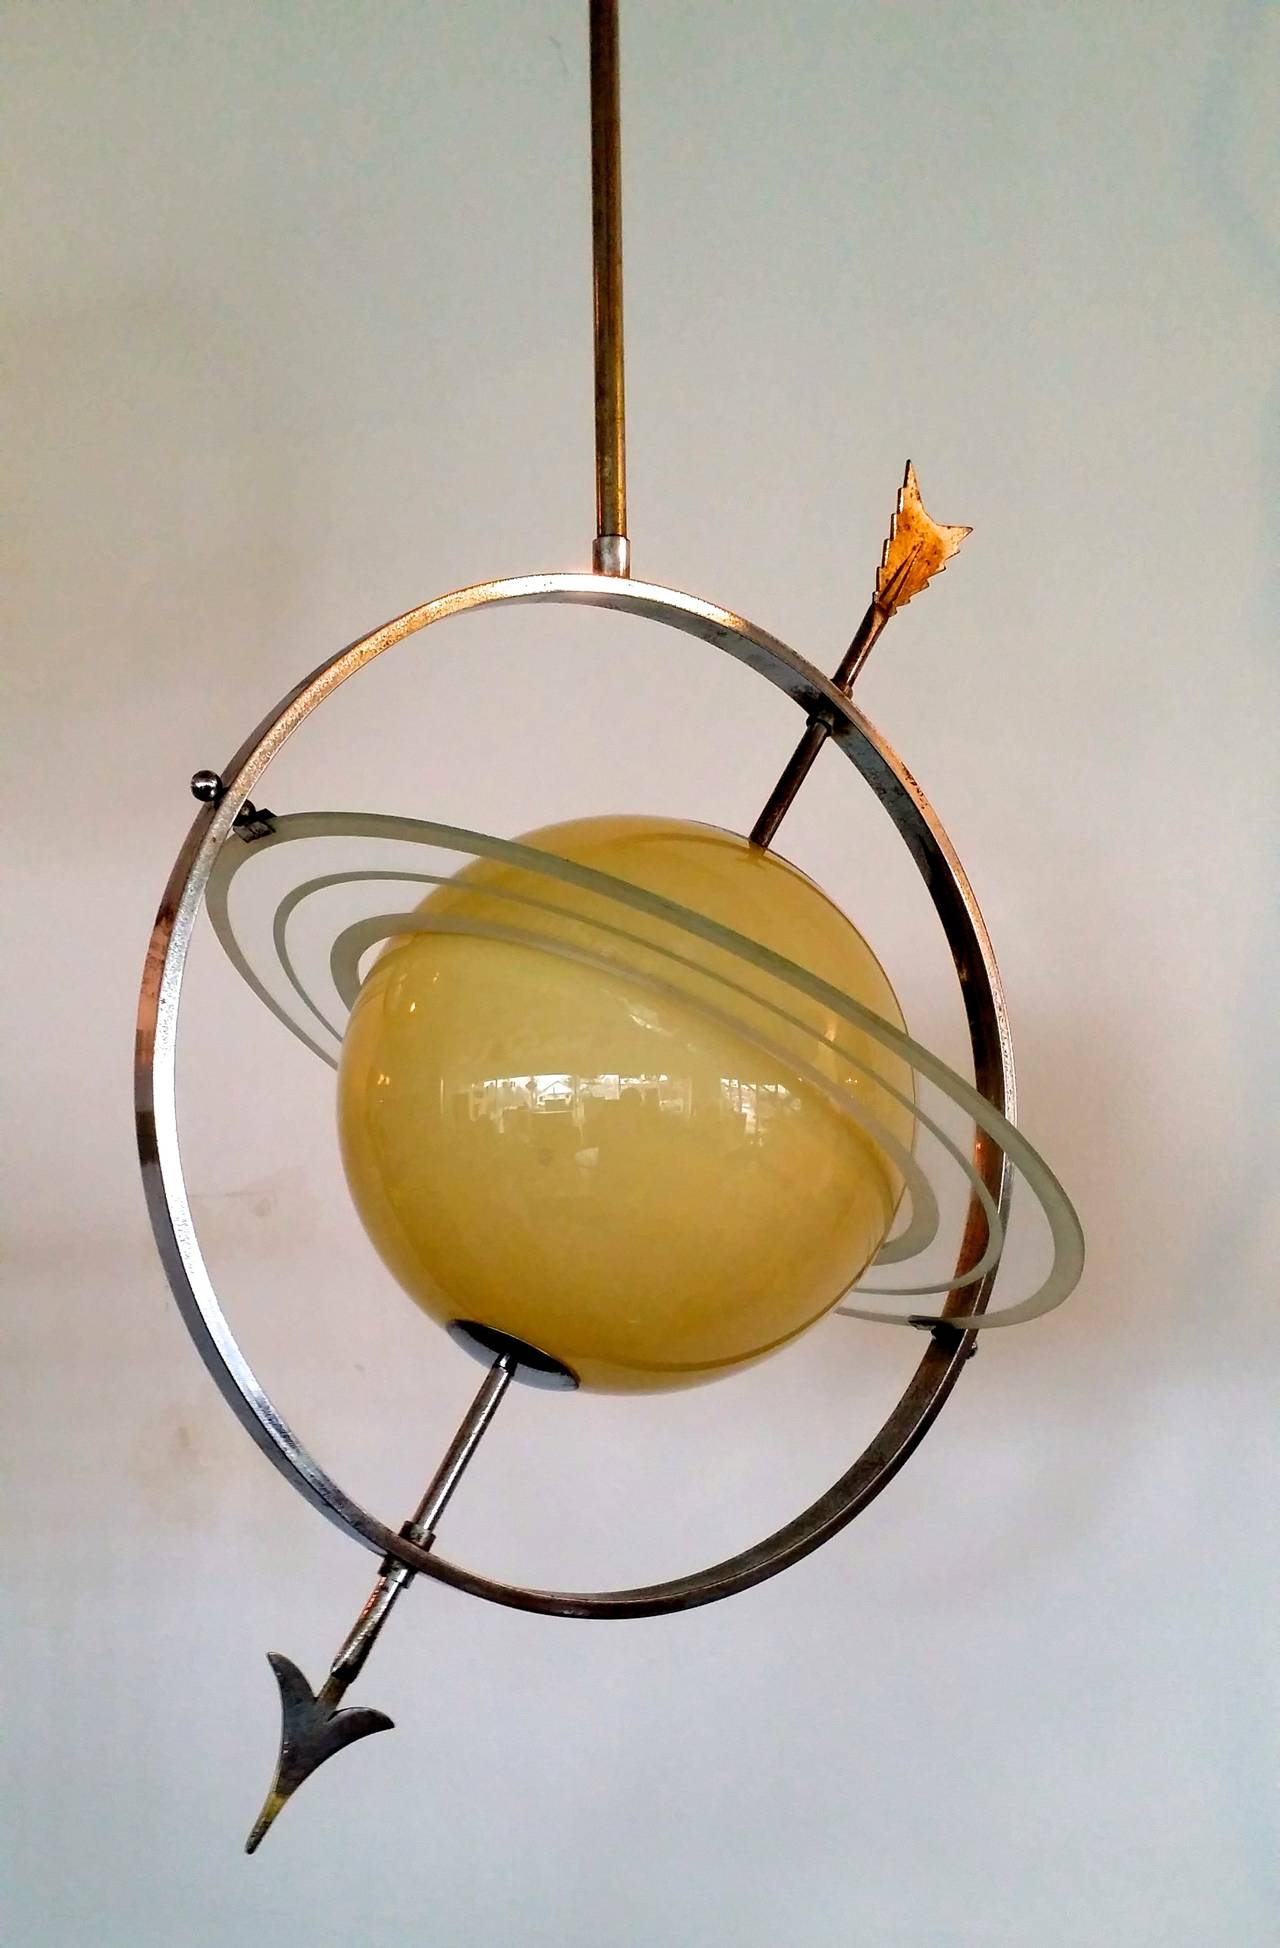 Vintage 1930's Italian Art Deco pendant light in the form of the planet Saturn after a similar lamp designed by Gio Ponti and Pietro Chiesa for S. A. Luigi Fontana & Co. Italy, 1933, in the Mitchell Wolfson Jr. Collection at Florida International